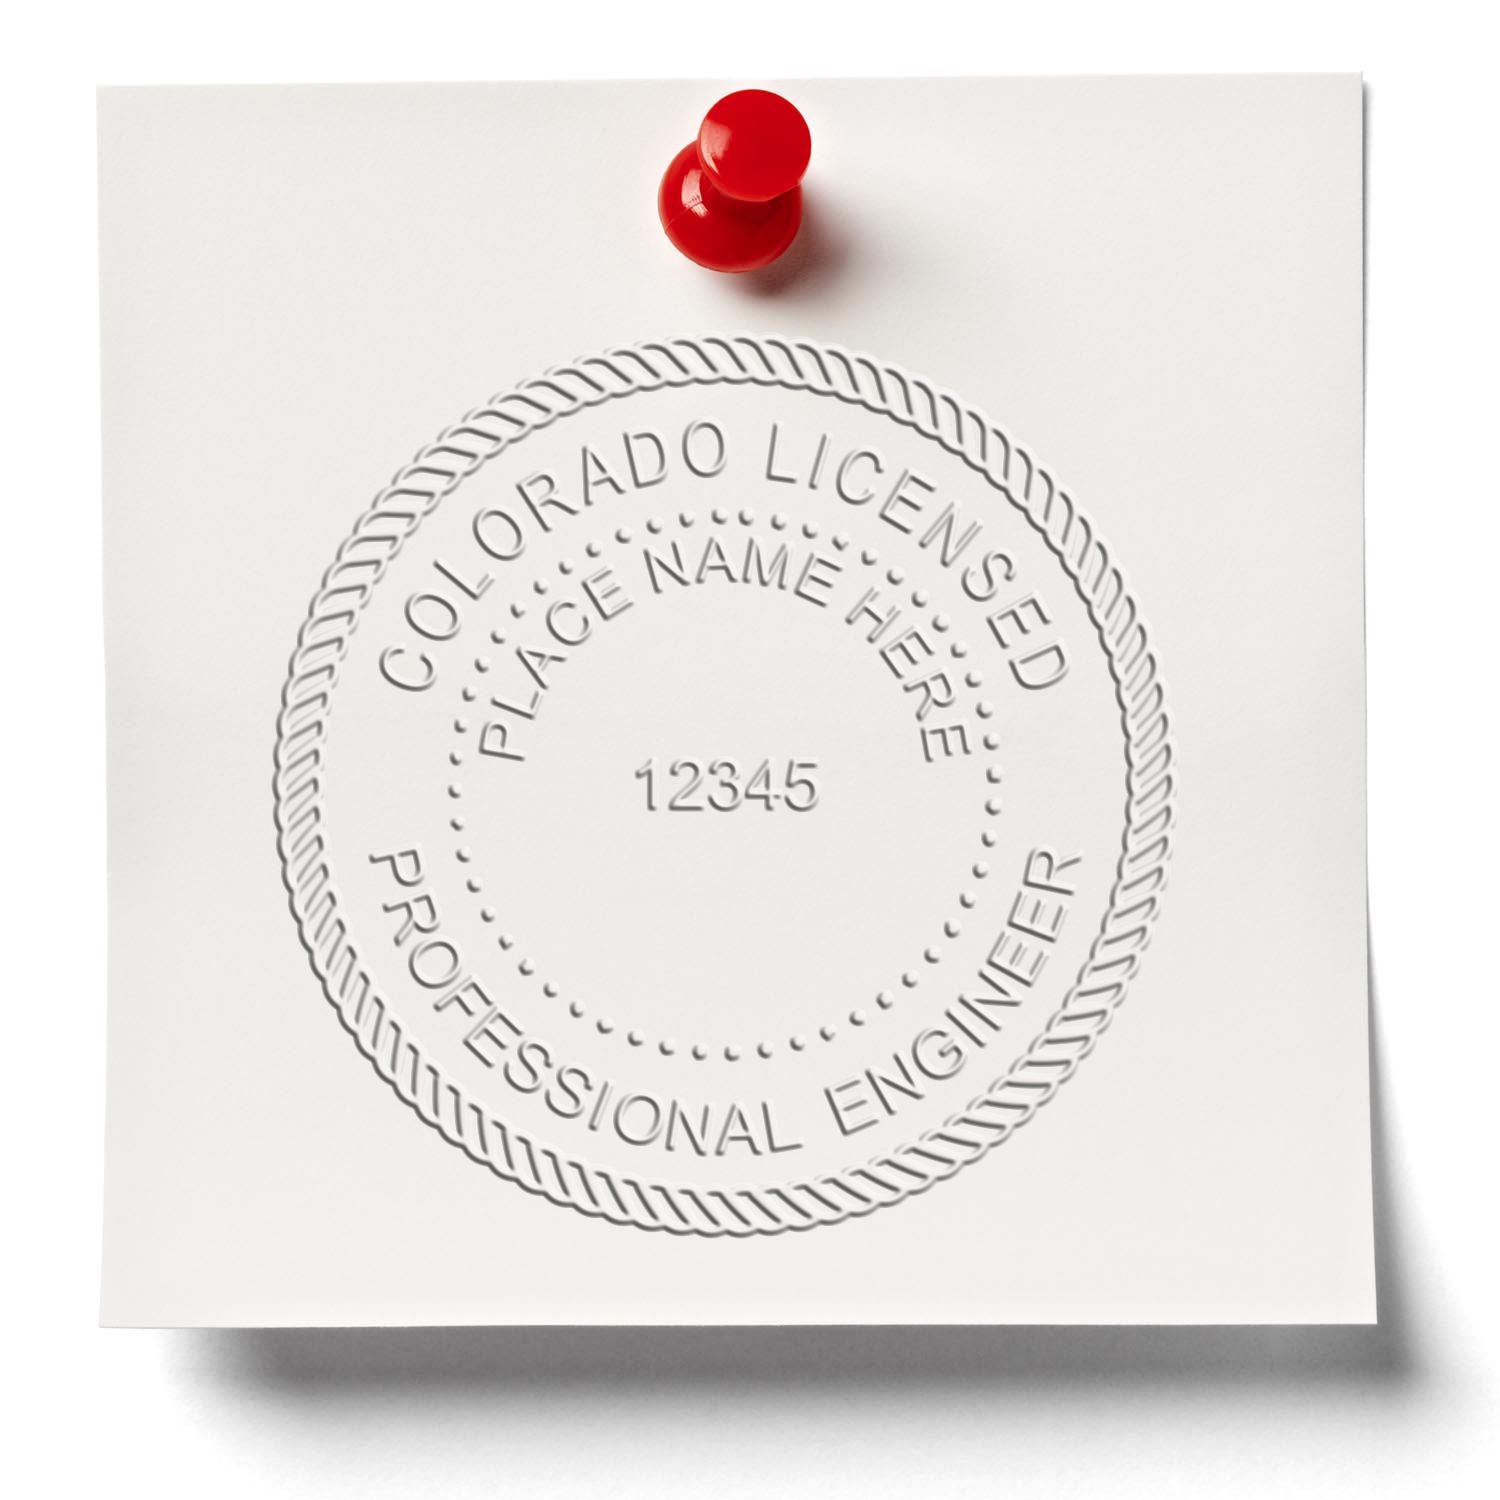 A stamped imprint of the Gift Colorado Engineer Seal in this stylish lifestyle photo, setting the tone for a unique and personalized product.